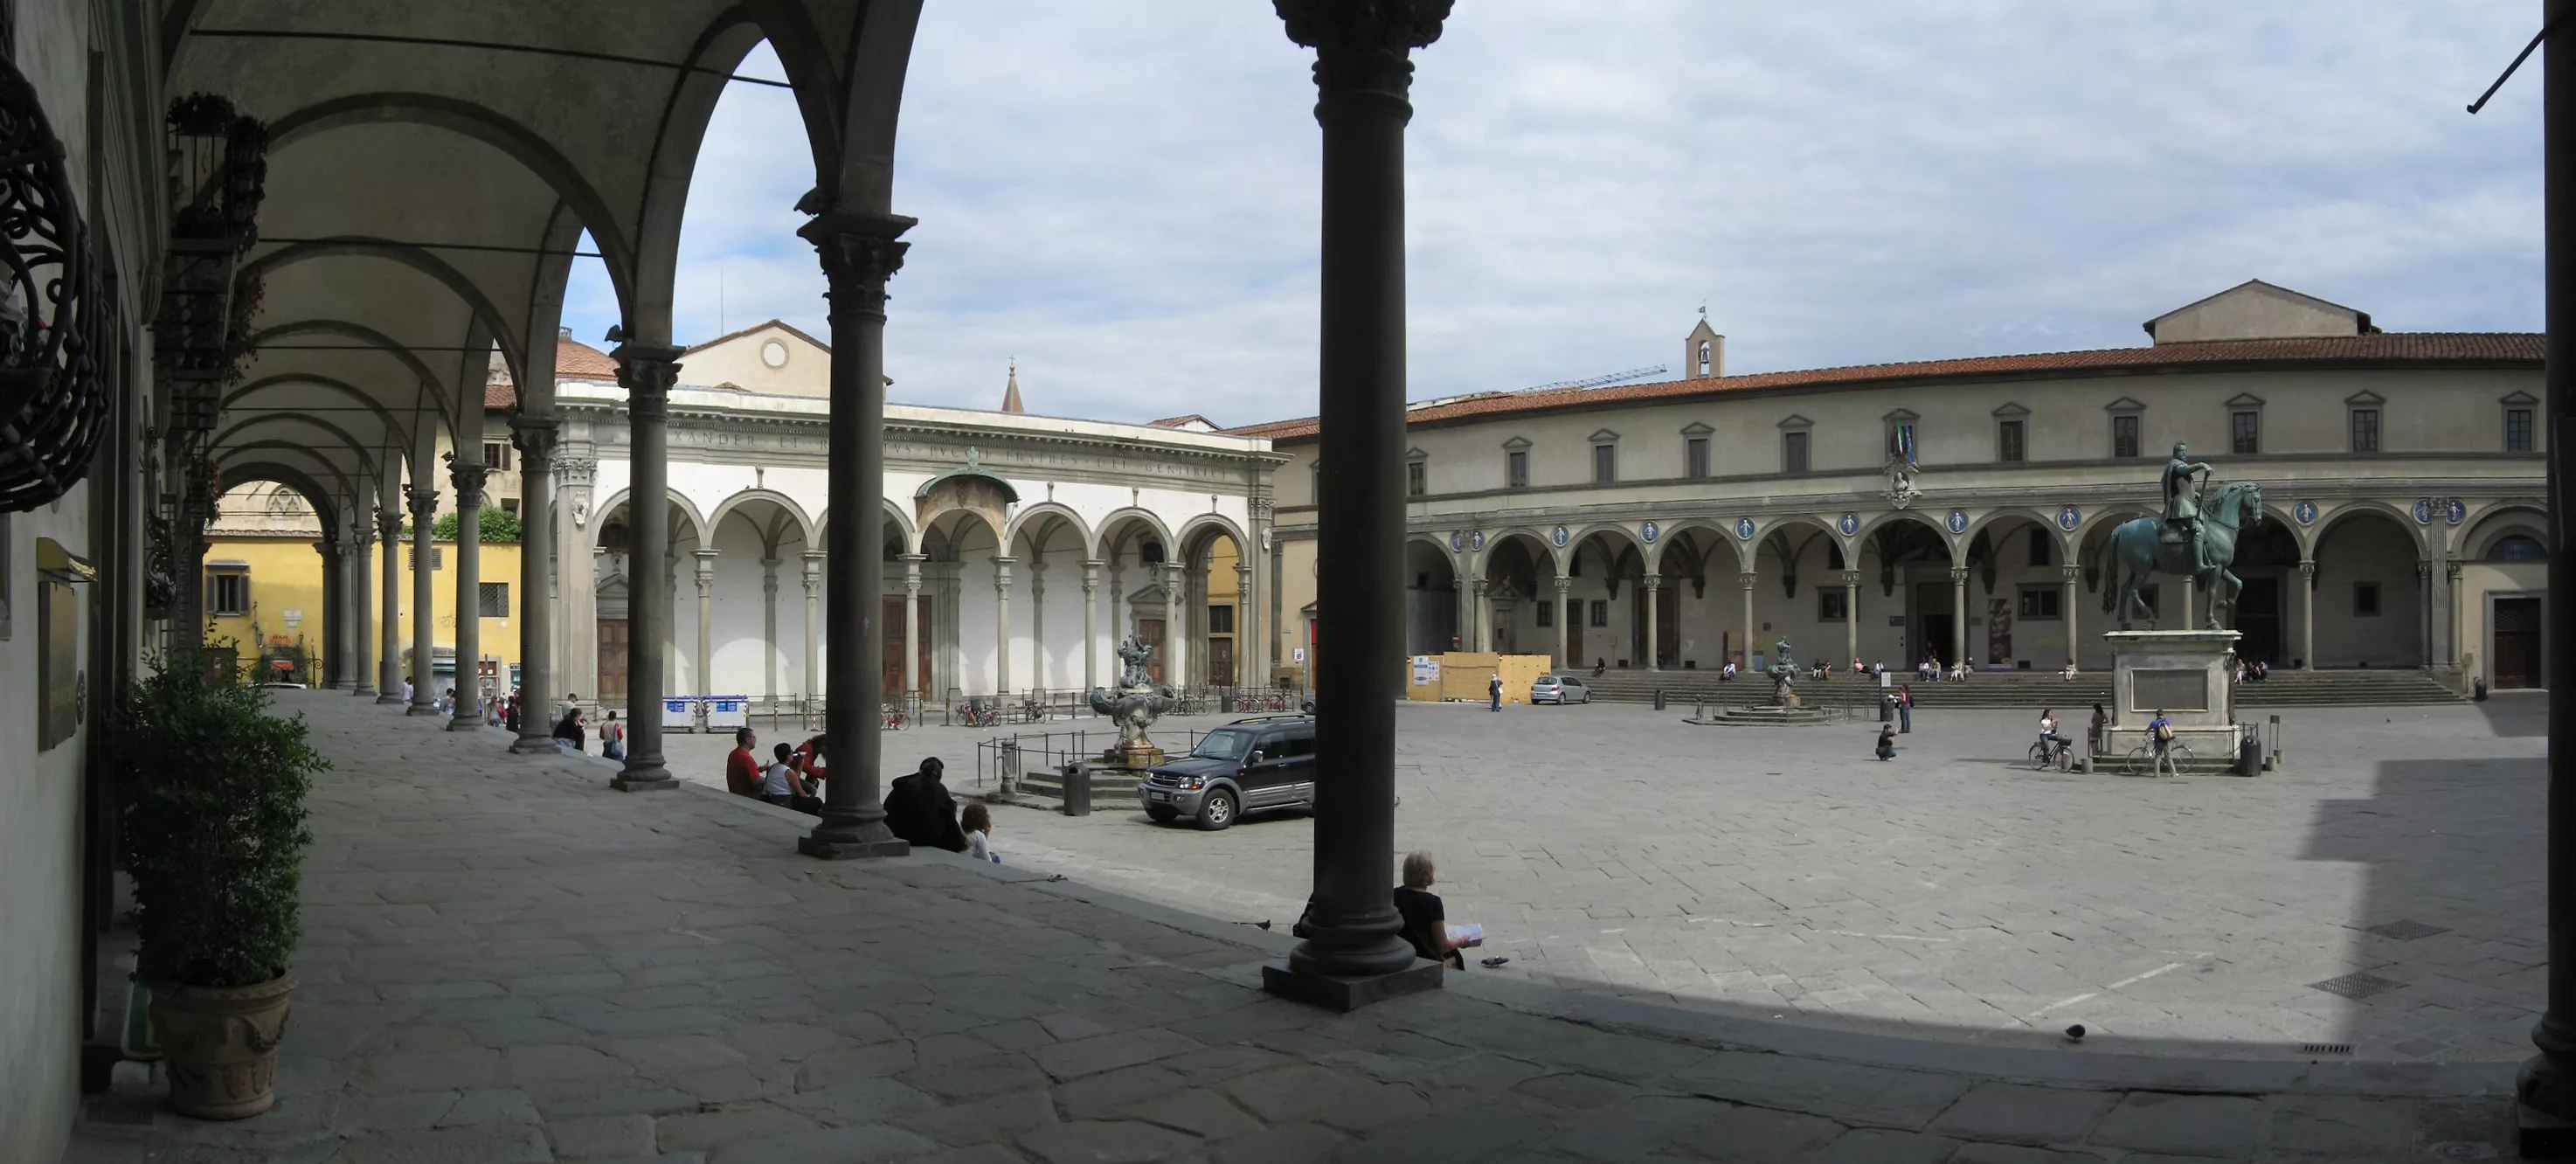 His Holiness Square in Italy, Europe | Architecture - Rated 3.6